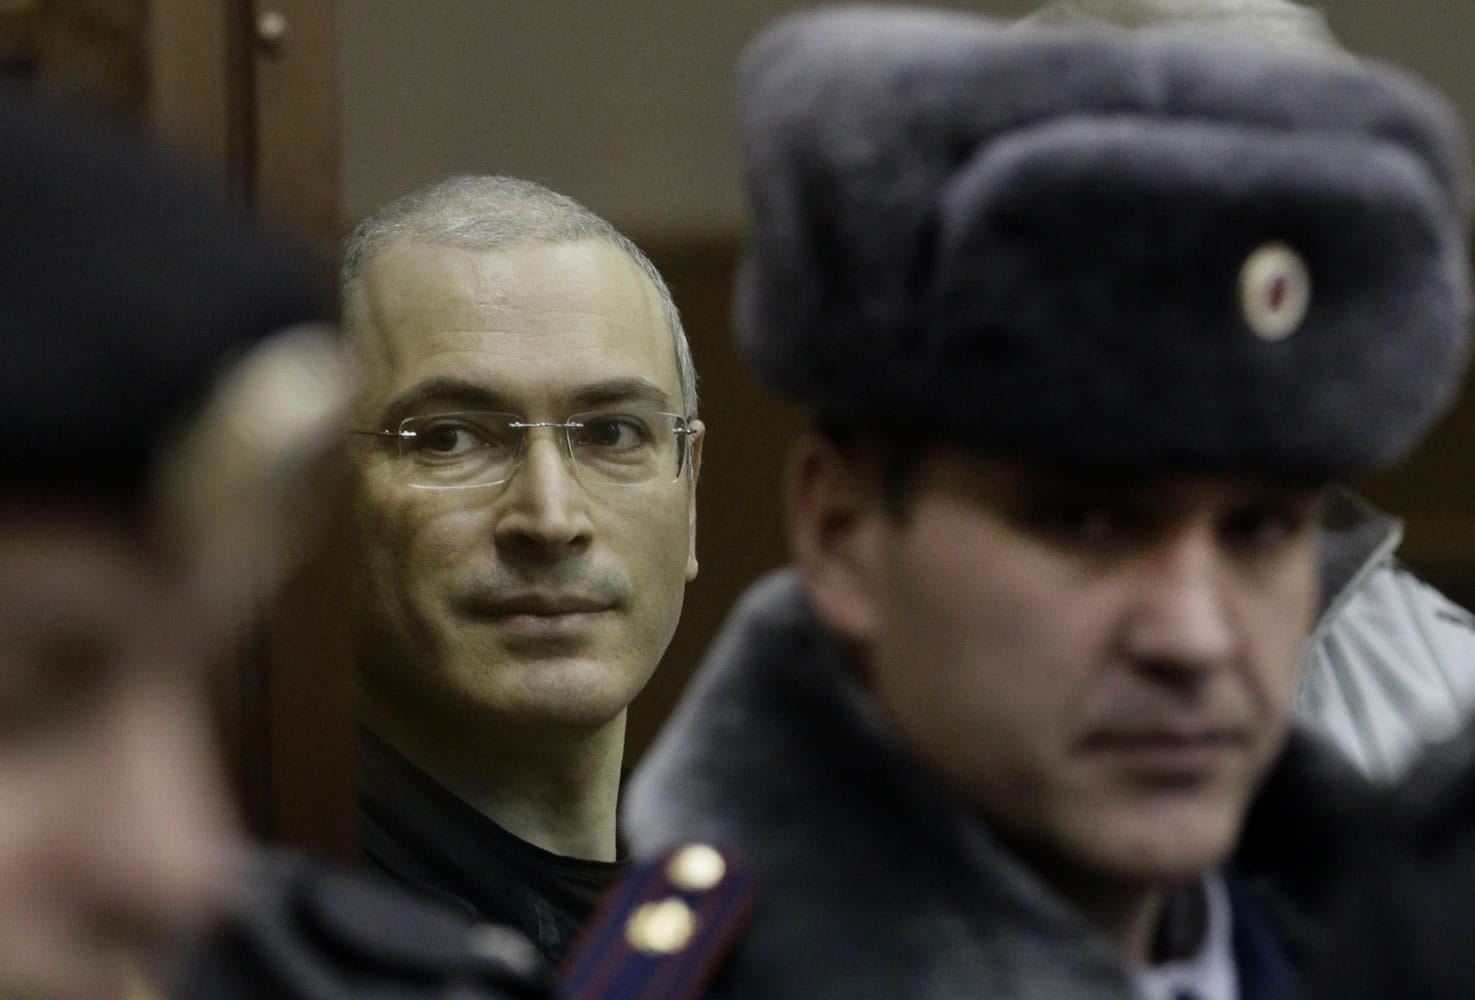 Mikhail Khodorkovsky, left, looks from behind glass at a court room in Moscow in 2010.